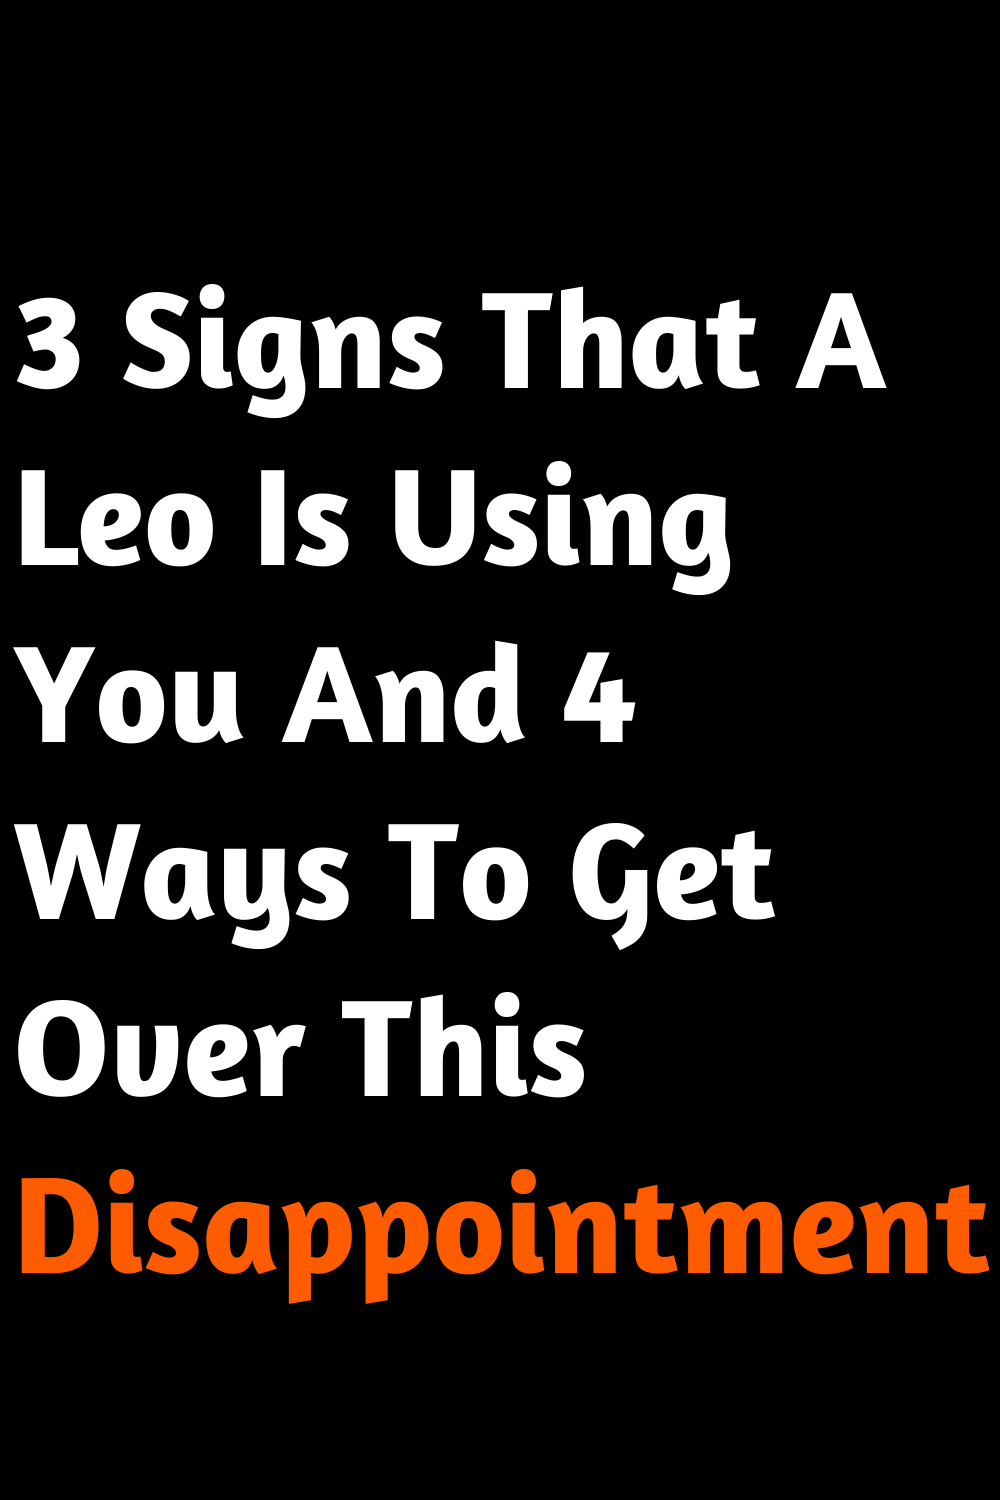 3 Signs That A Leo Is Using You And 4 Ways To Get Over This Disappointment